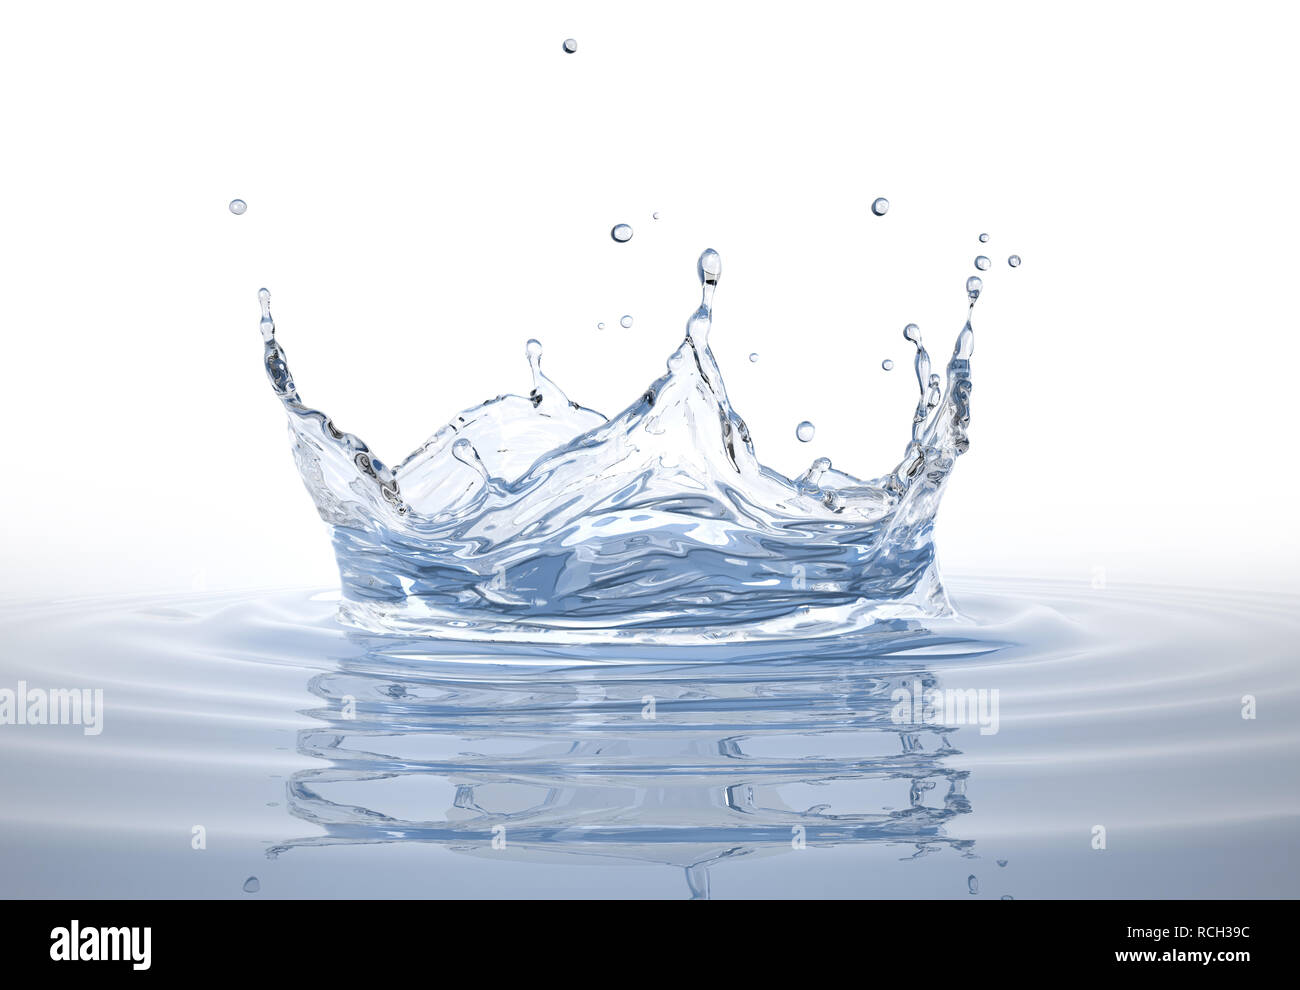 Water crown splash in a water pool, with circular ripples around. Isolated on white background. Stock Photo